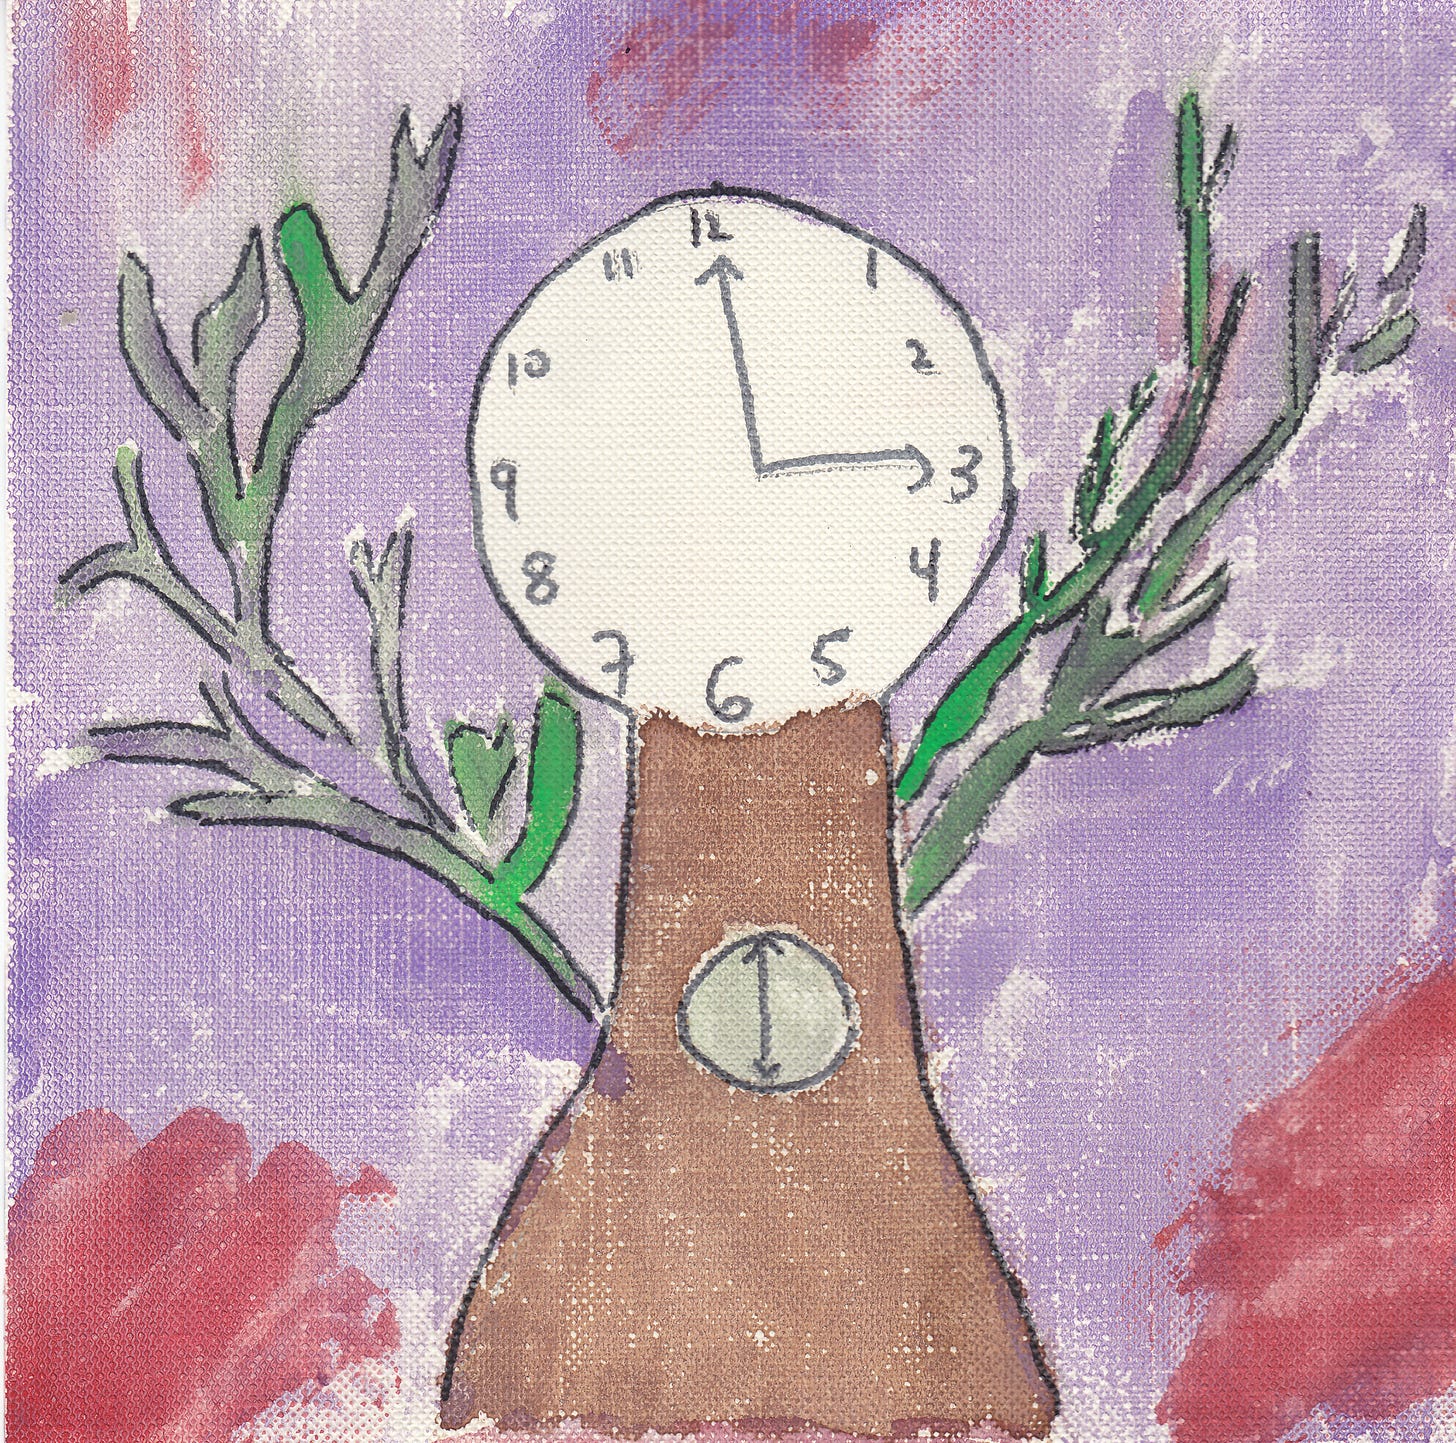 tree with clock head, green branches, brown trunk with little clock. purple background and red blobs on bottom left and right